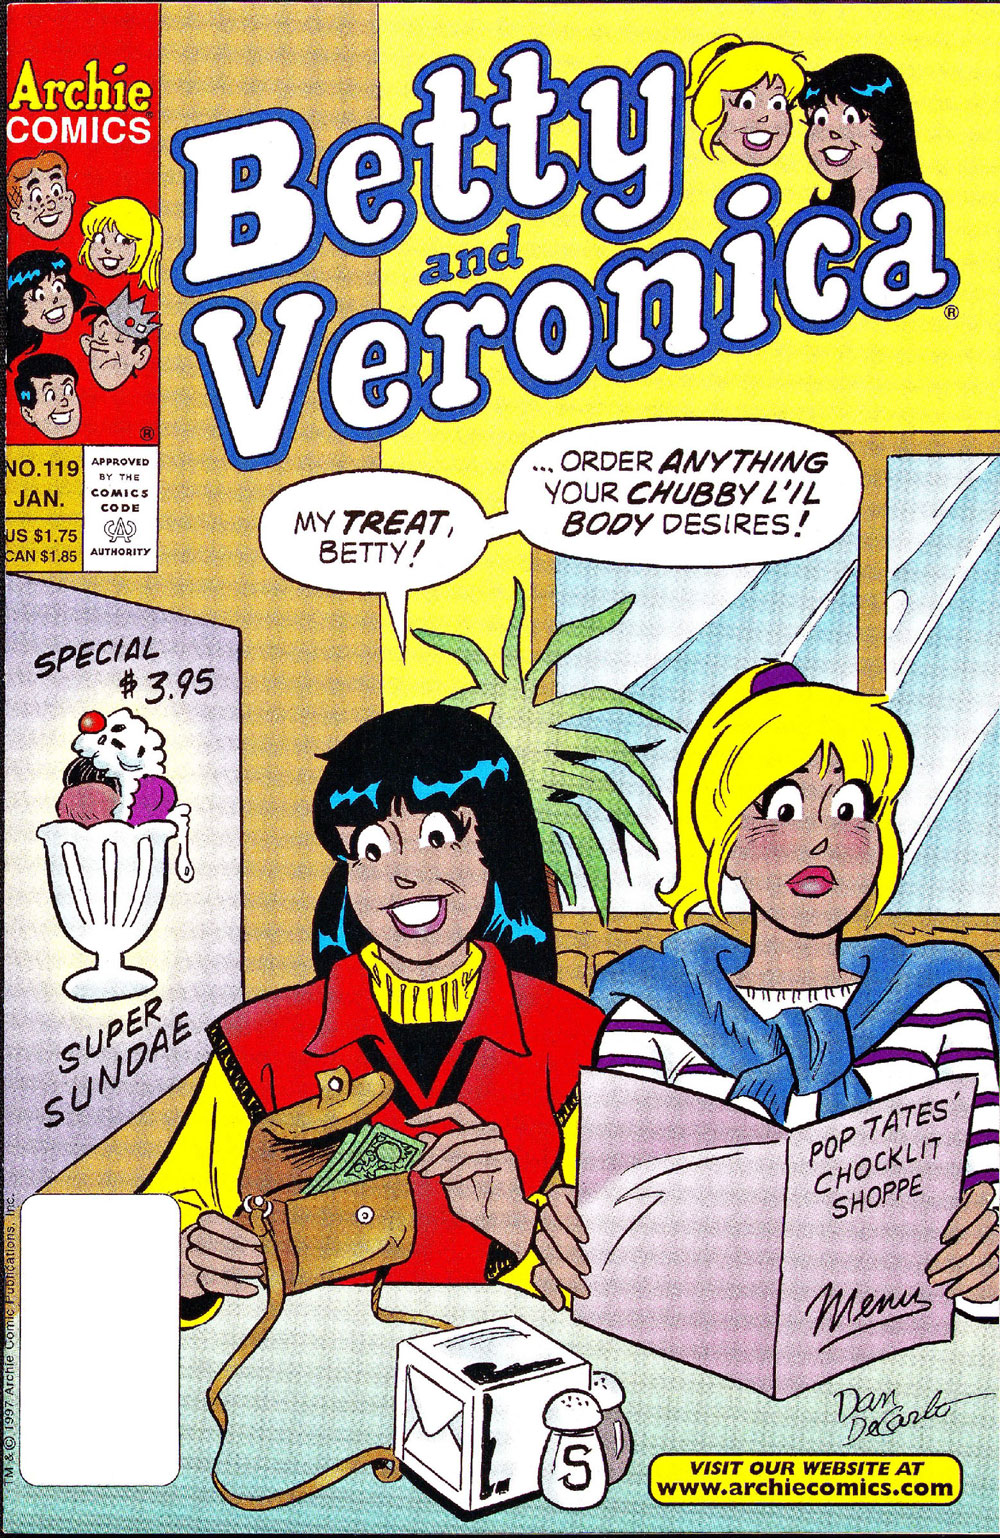 The cover of BETTY AND VERONICA #119. Betty and Veronica are hanging out at an ice cream shop..